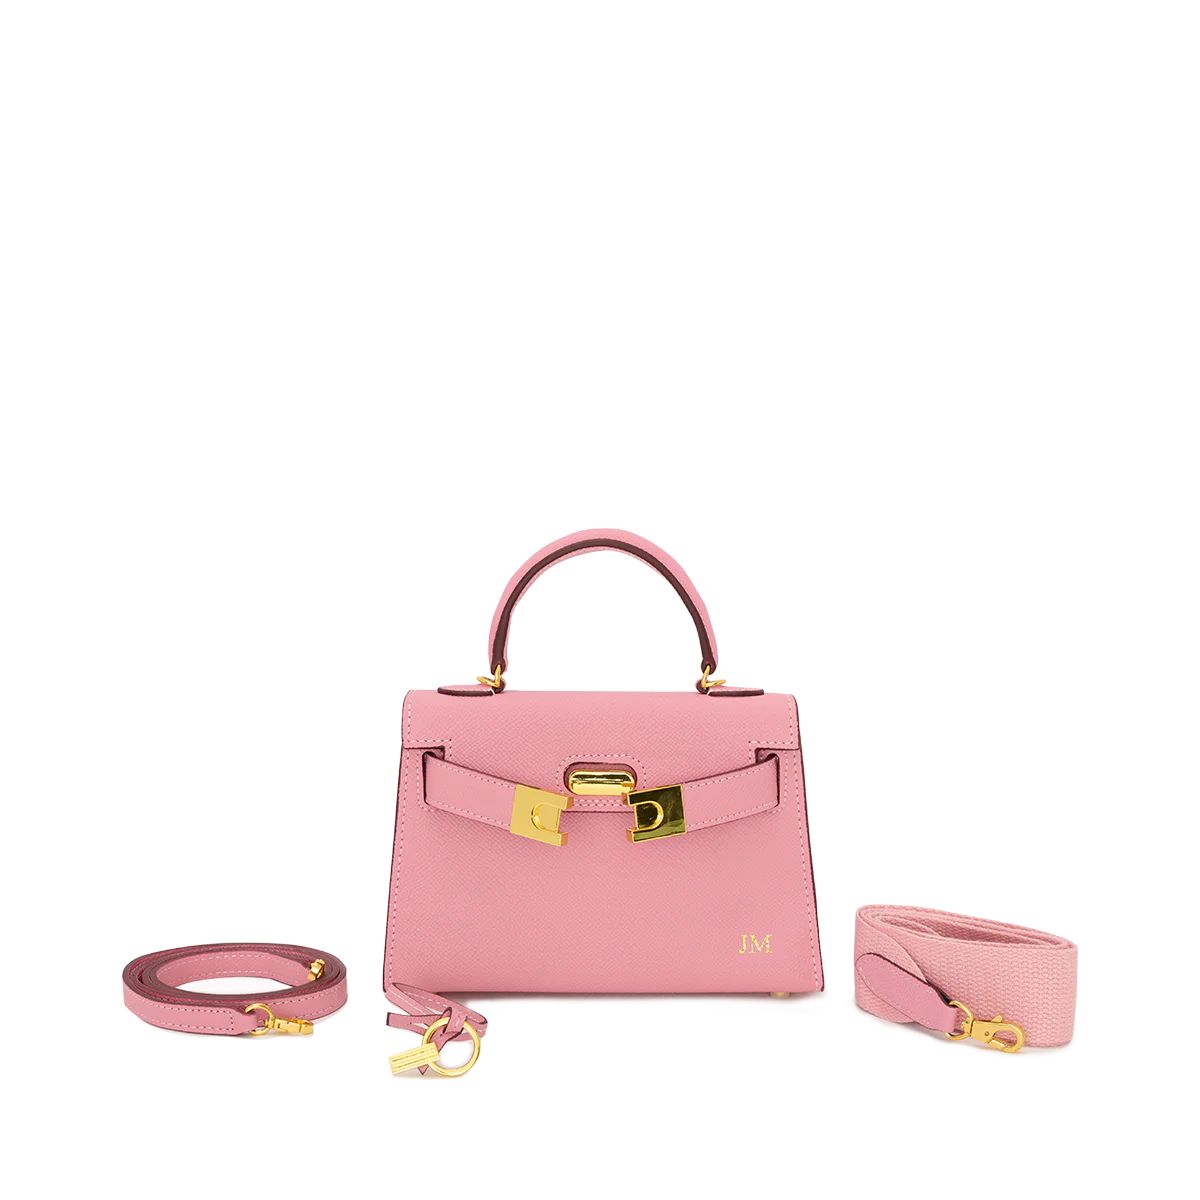 Lily and Bean Evie Leather Bag Blush Pink | Lily and Bean